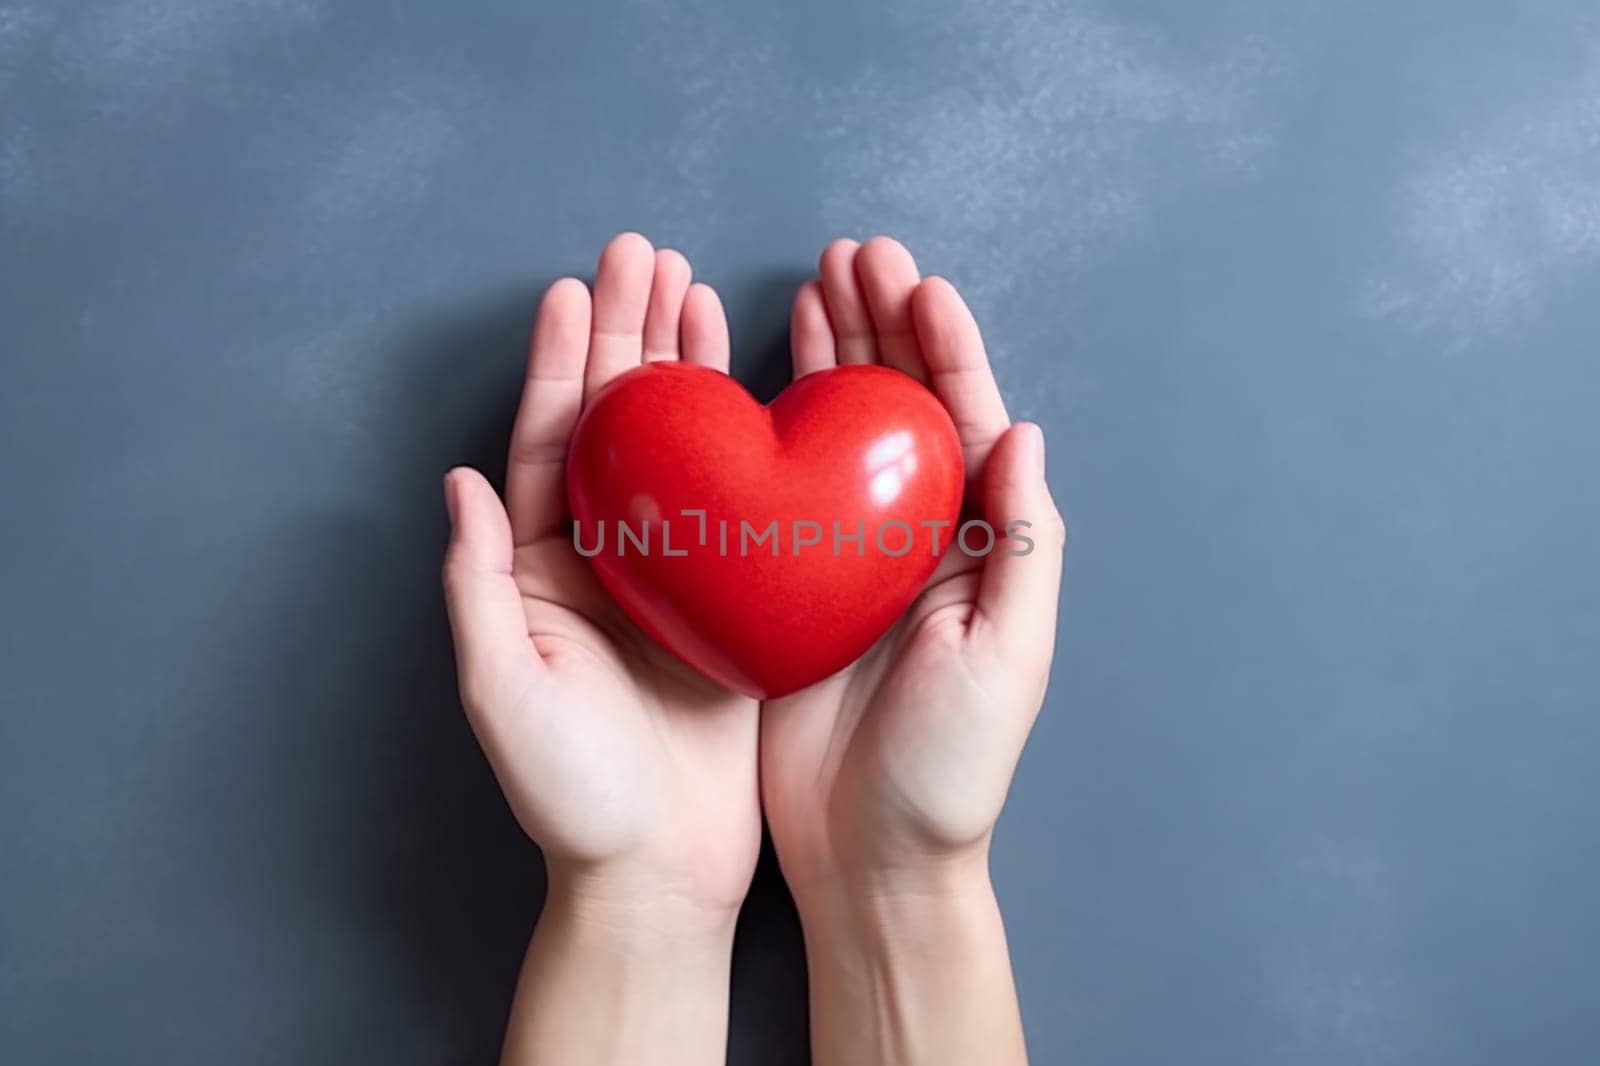 Hands holding a red heart against a grey background